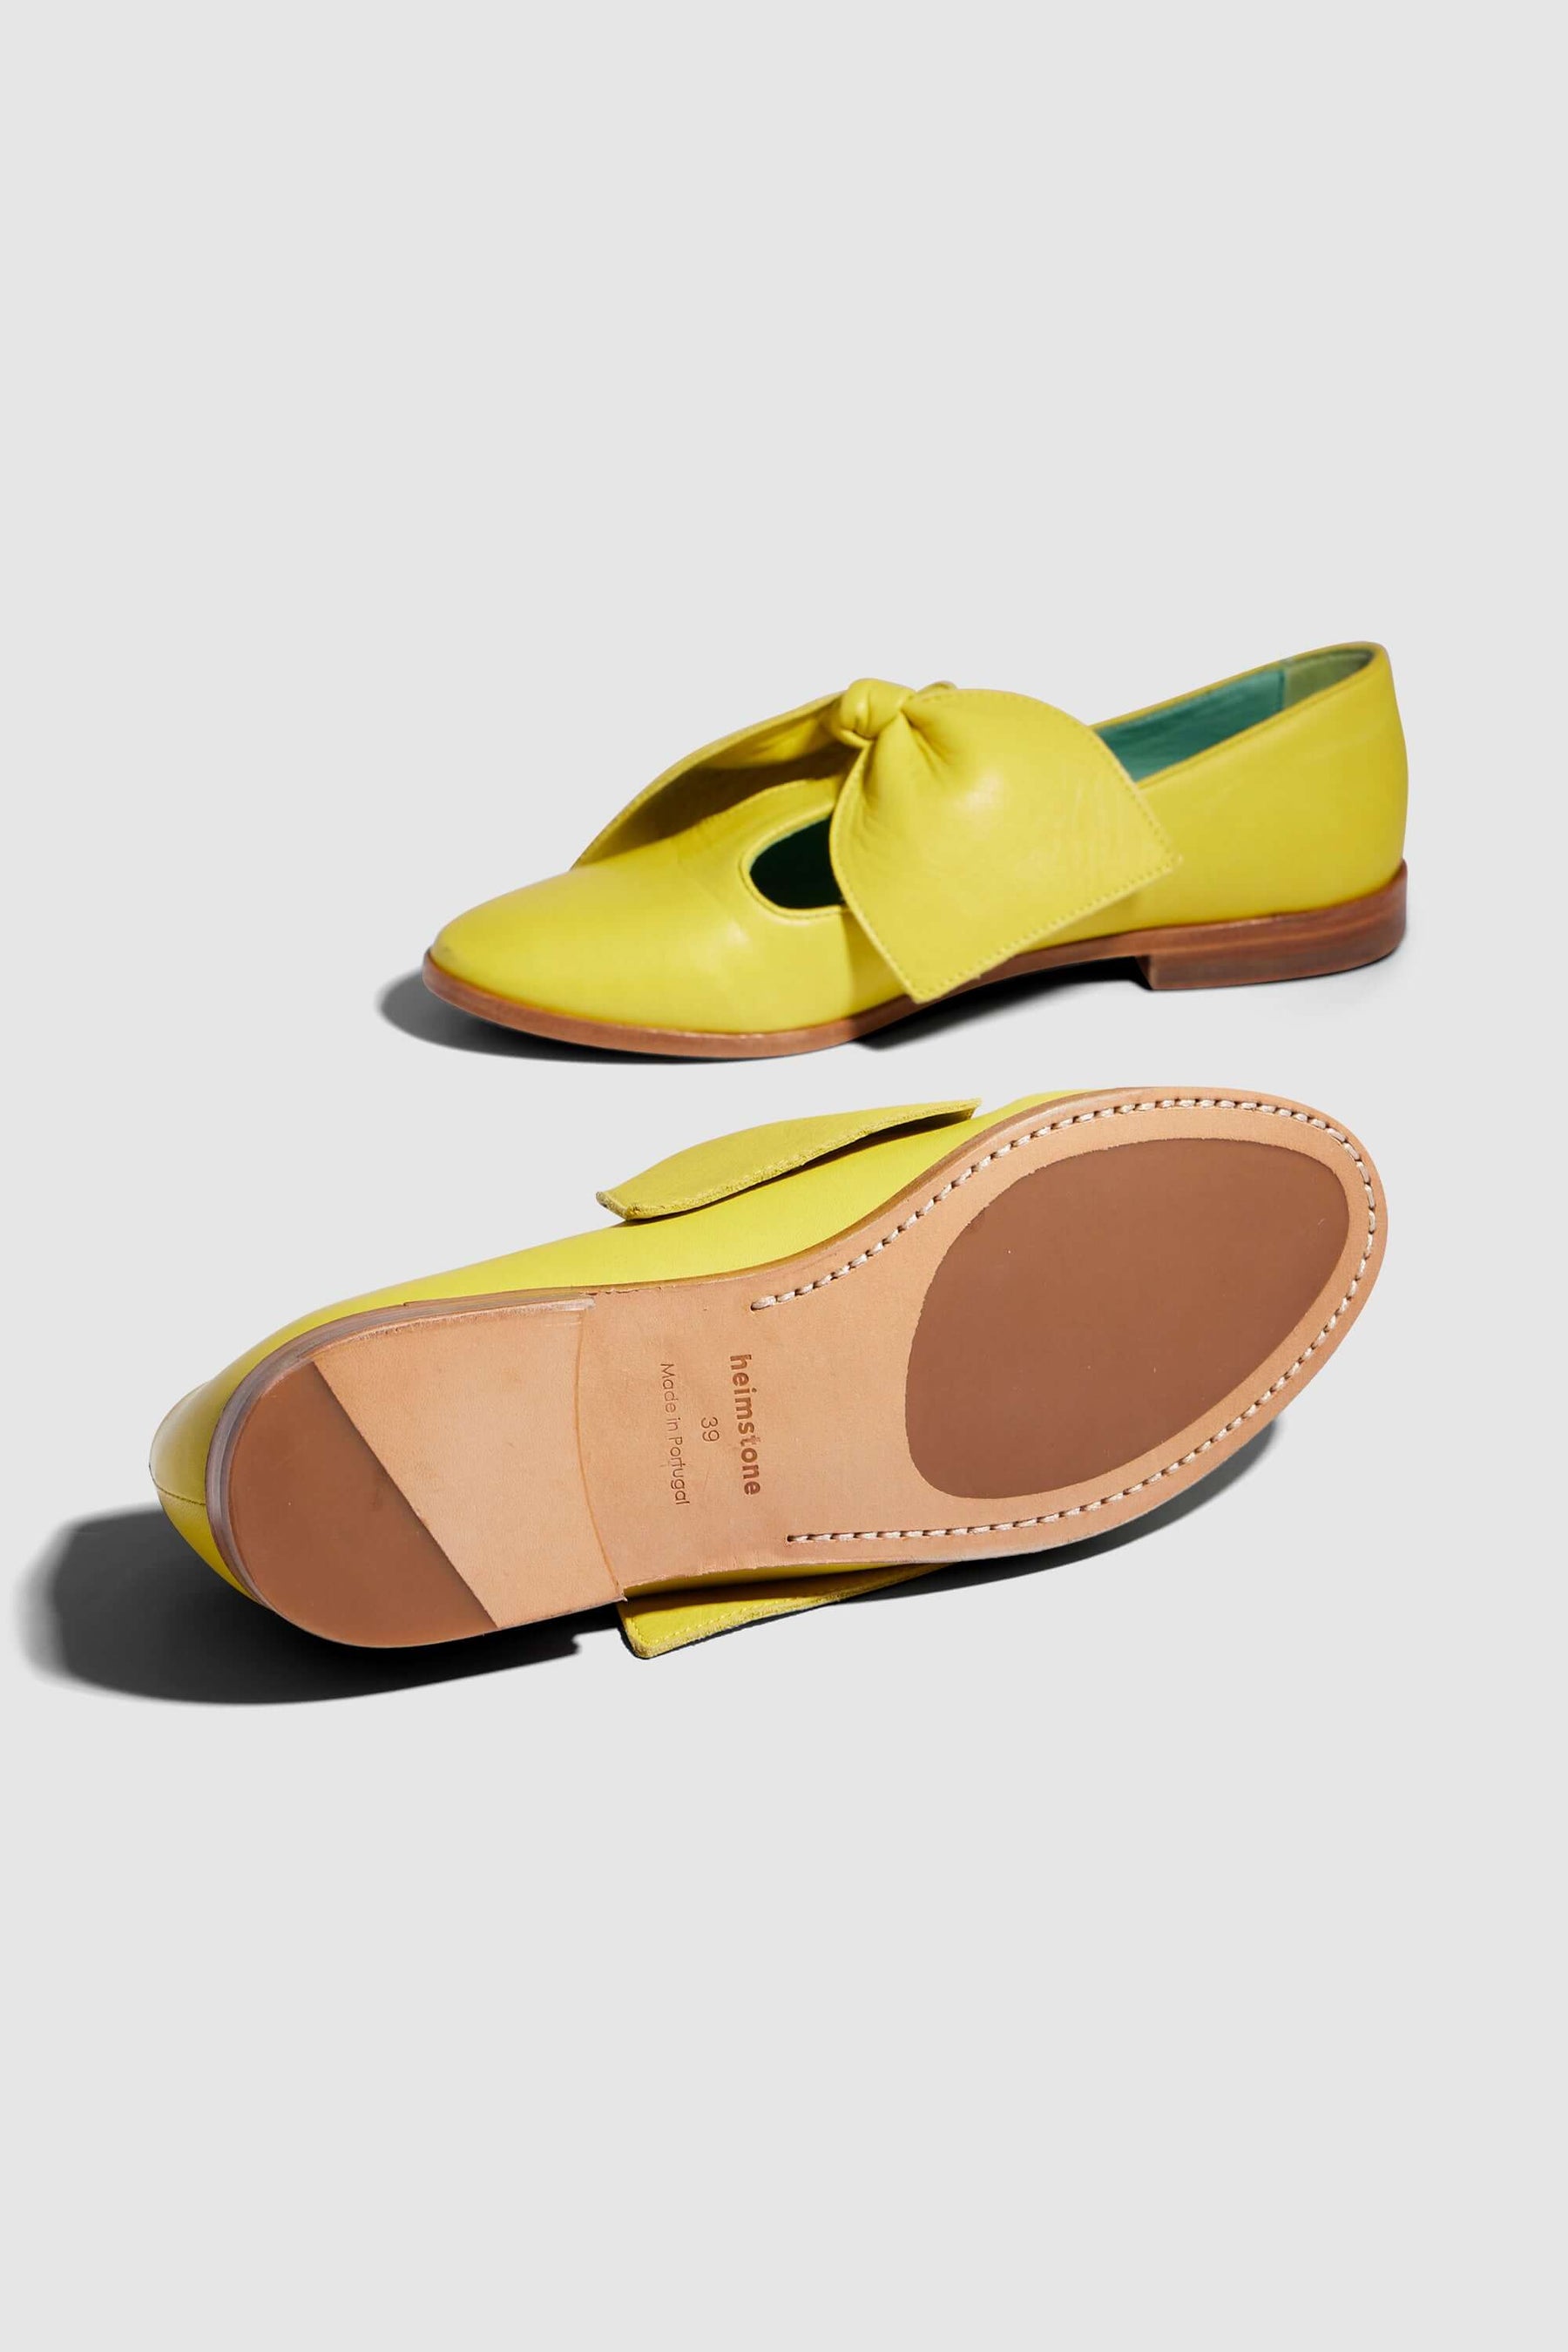 BB ballerina shoes in yellow leather